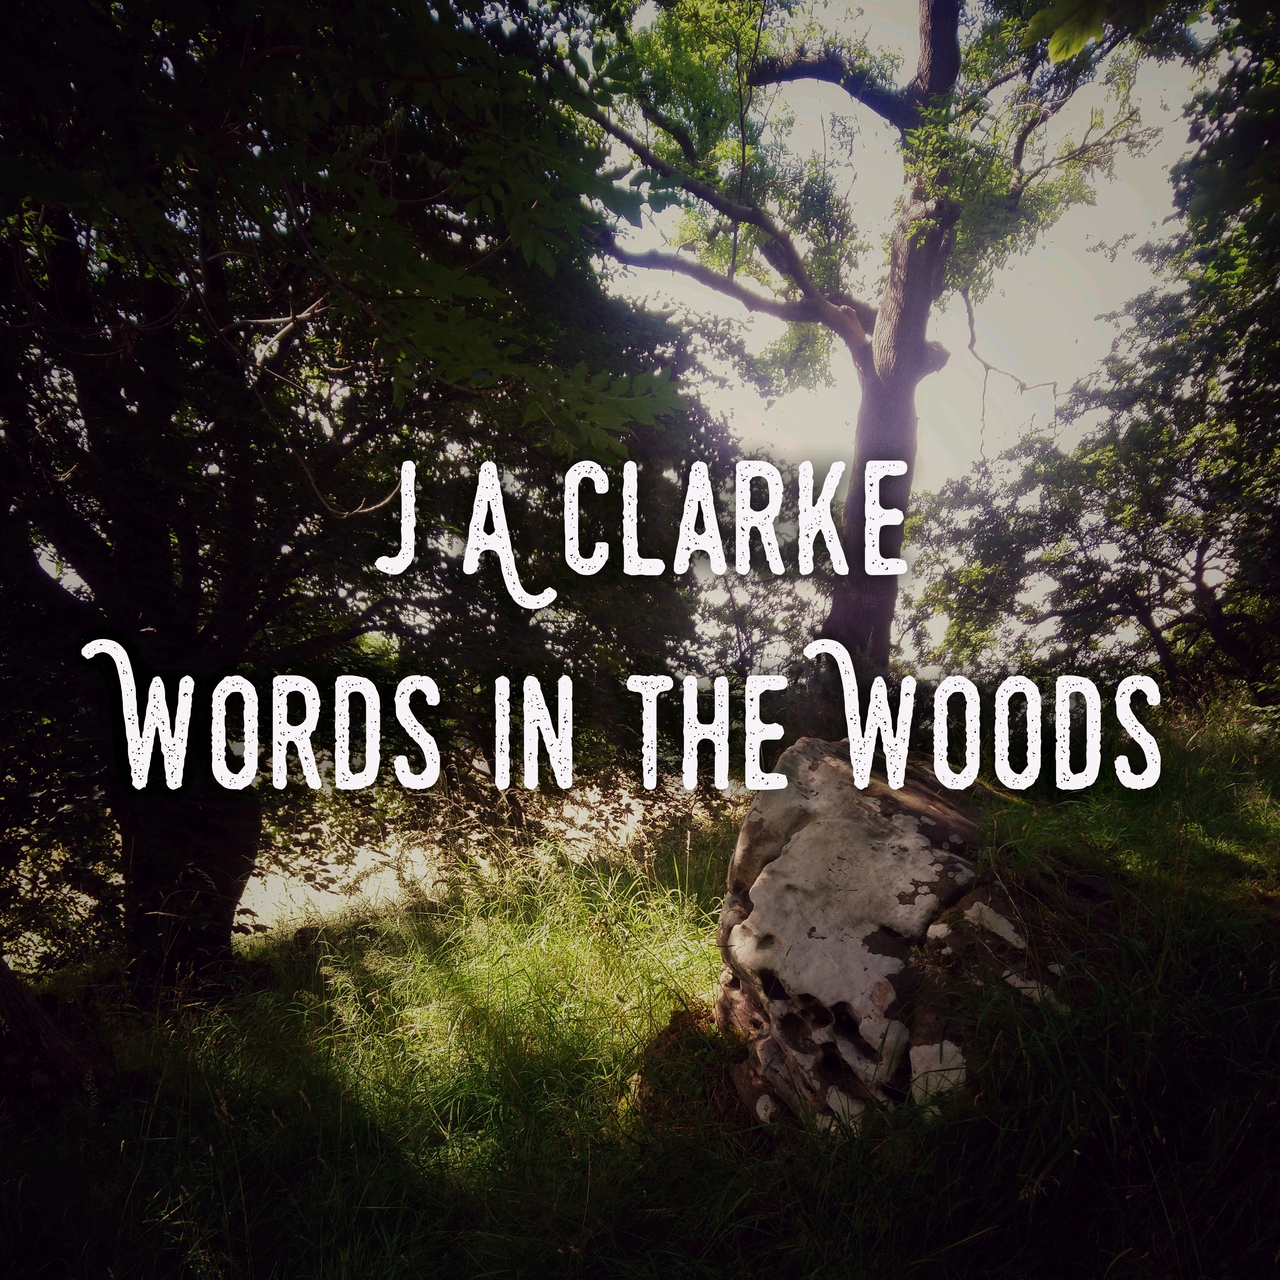 Words in the Woods